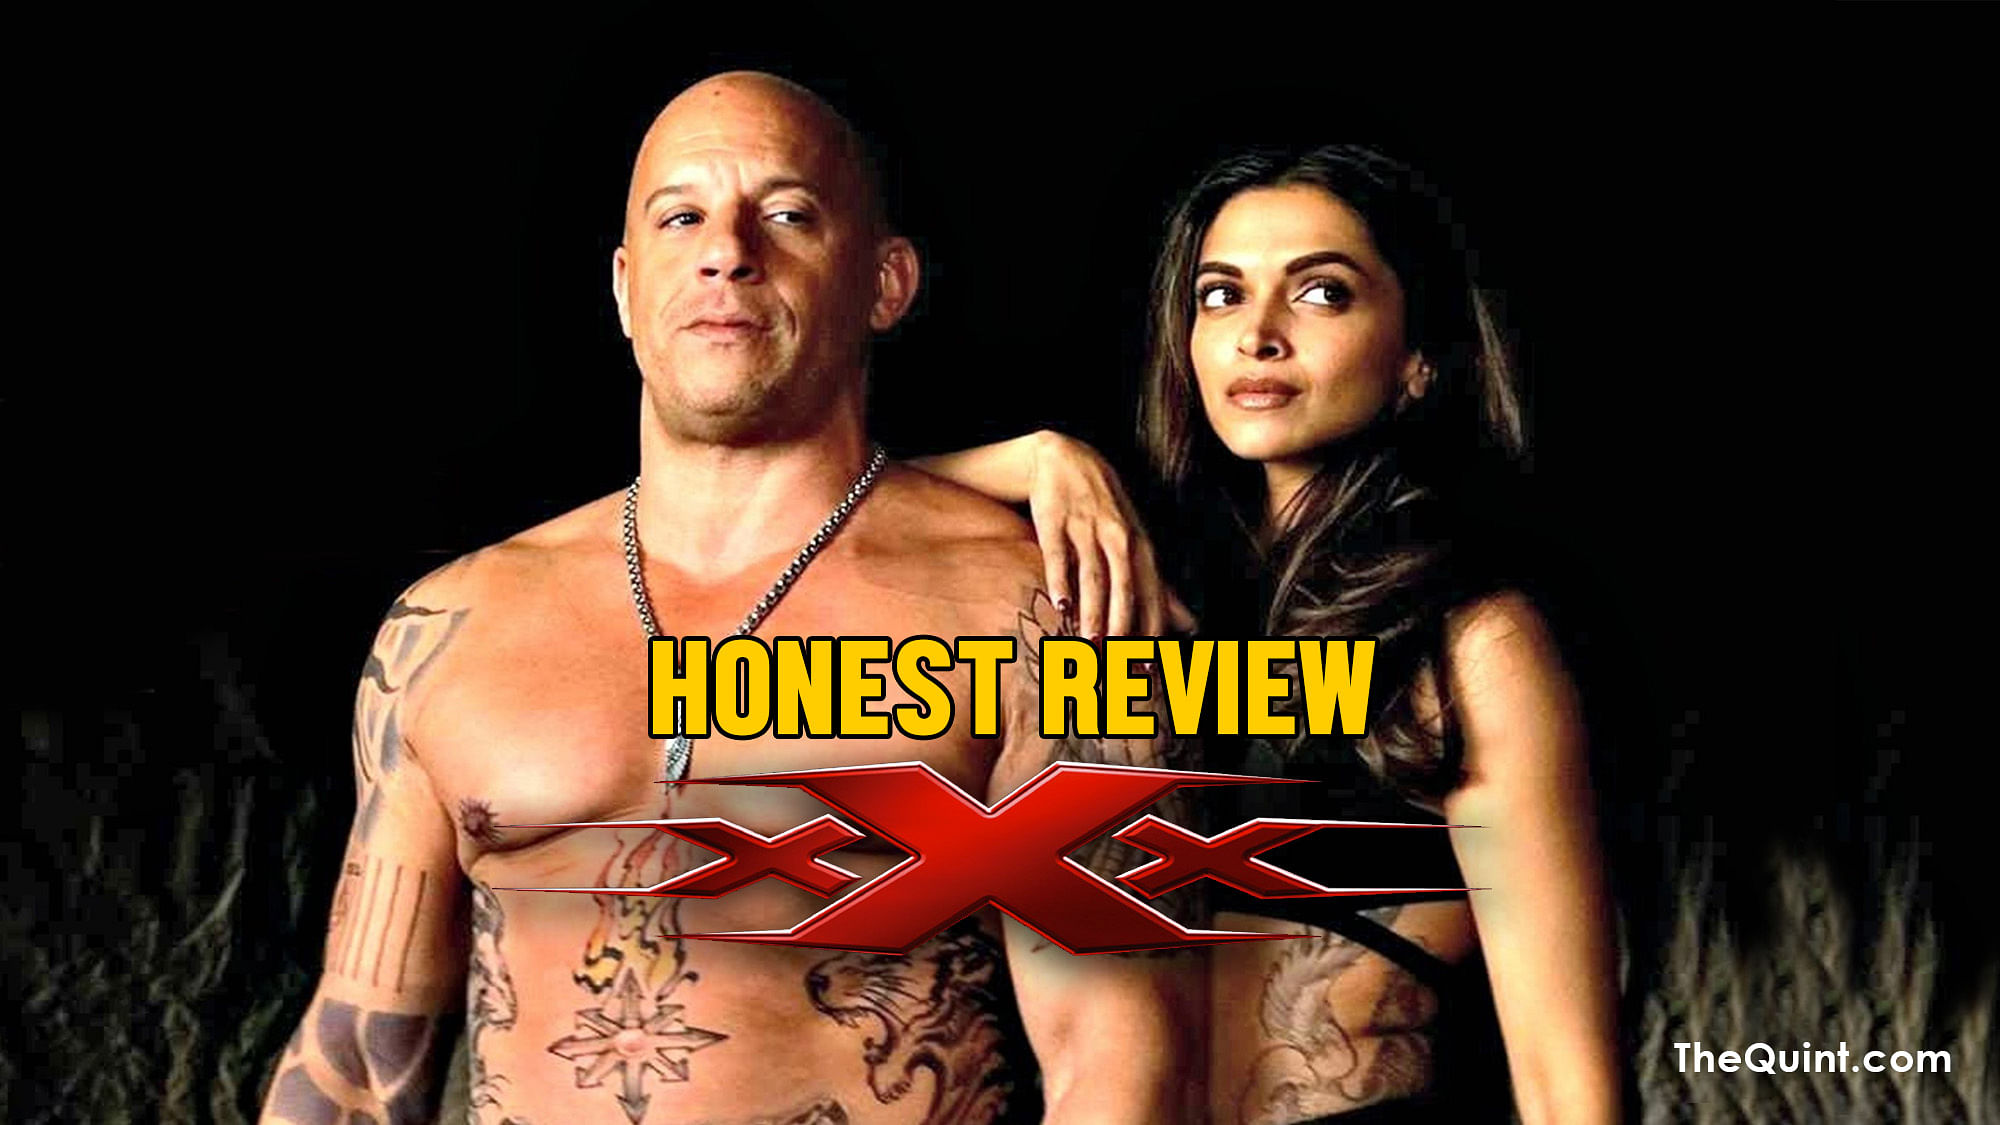 Is Vin Diesel-Deepika Padukon starrer <i>XXX: Return of Xander Cage </i>any good? Here’s an honest review. (Photo: Altered by <b>The Quint</b>)